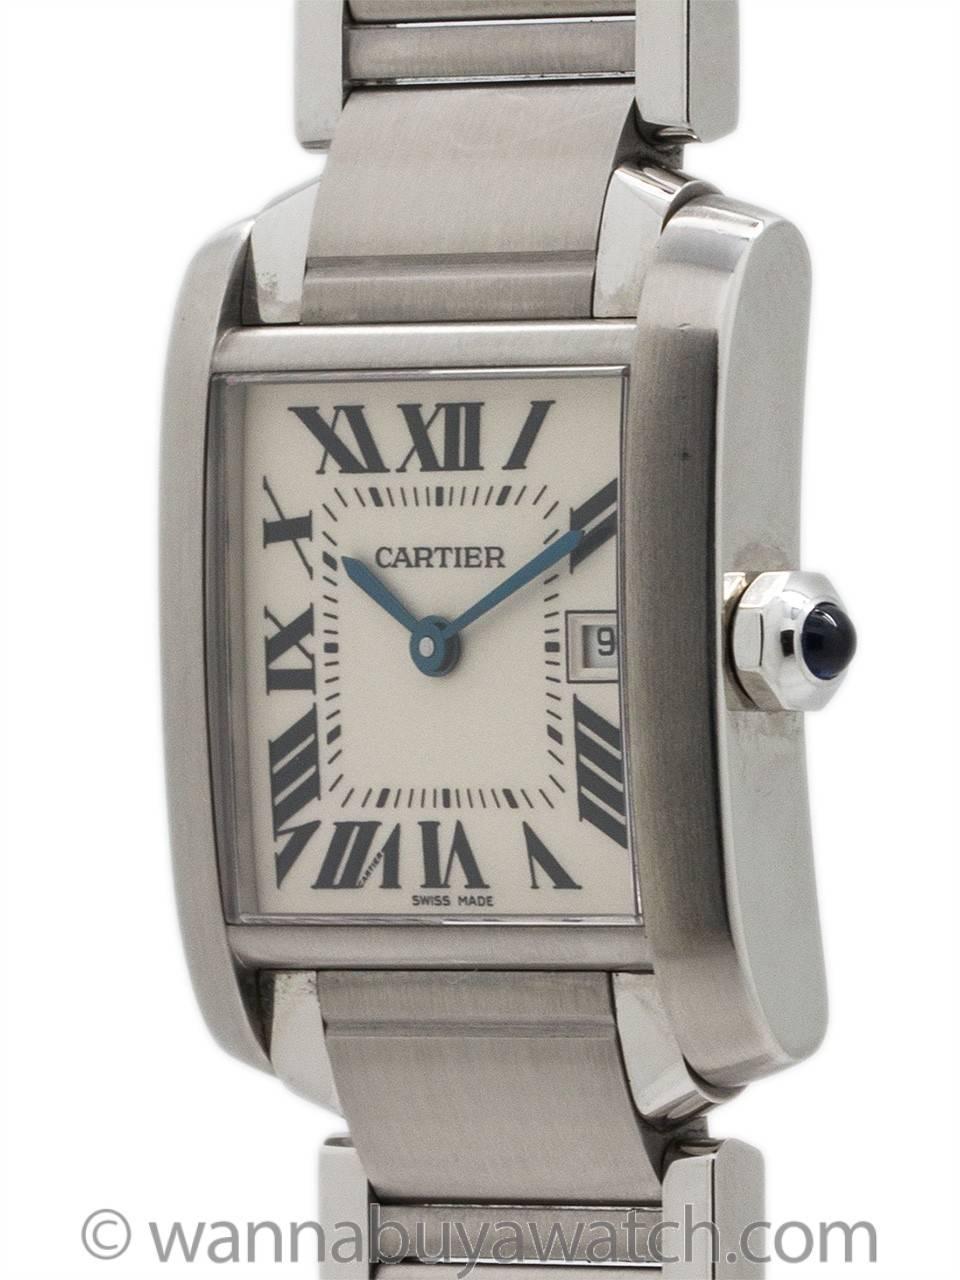 Cartier Tank Francaise stainless steel midsize model with date. Featuring 26 X 35 mm case with sapphire crystal. Classic silvered dial with Roman numerals and blued steel hands and sapphire cabachon crown. Battery powered quartz movement. With